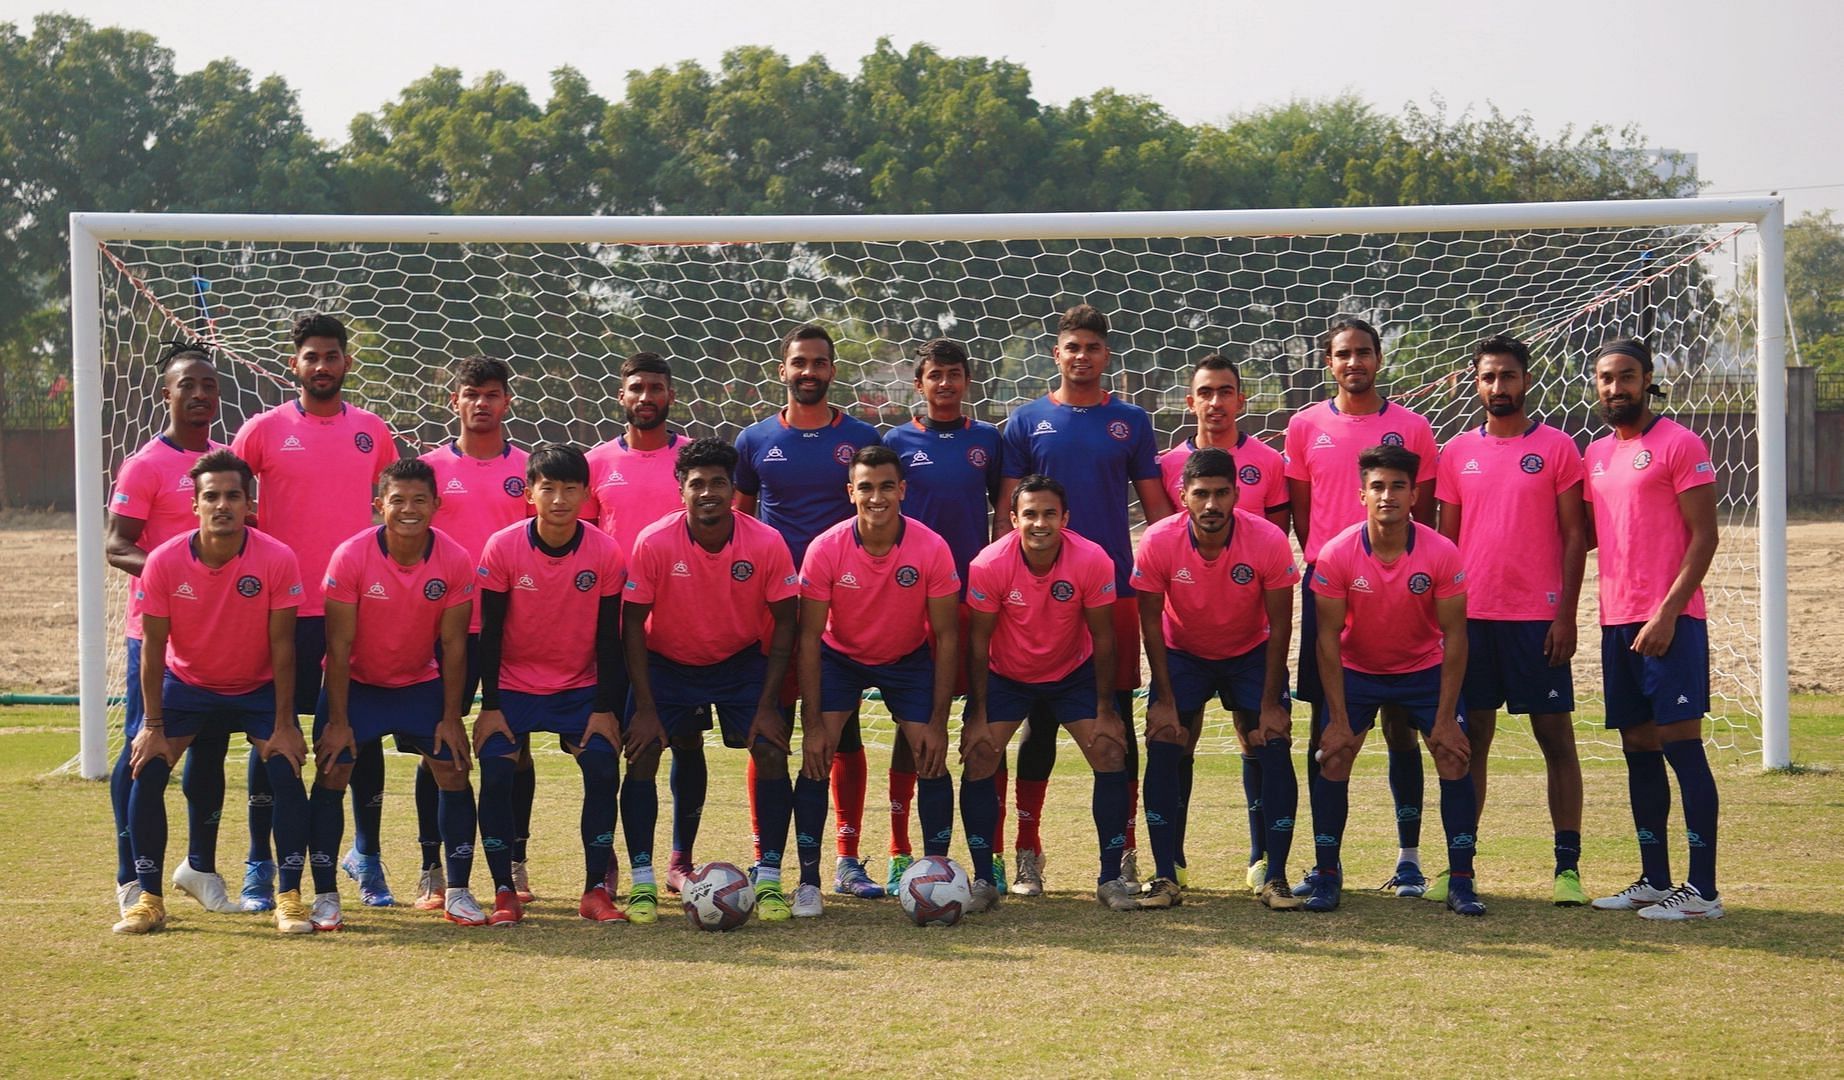 Rajasthan United FC players posing for a picture (PC: Twitter/ILeagueOfficial)